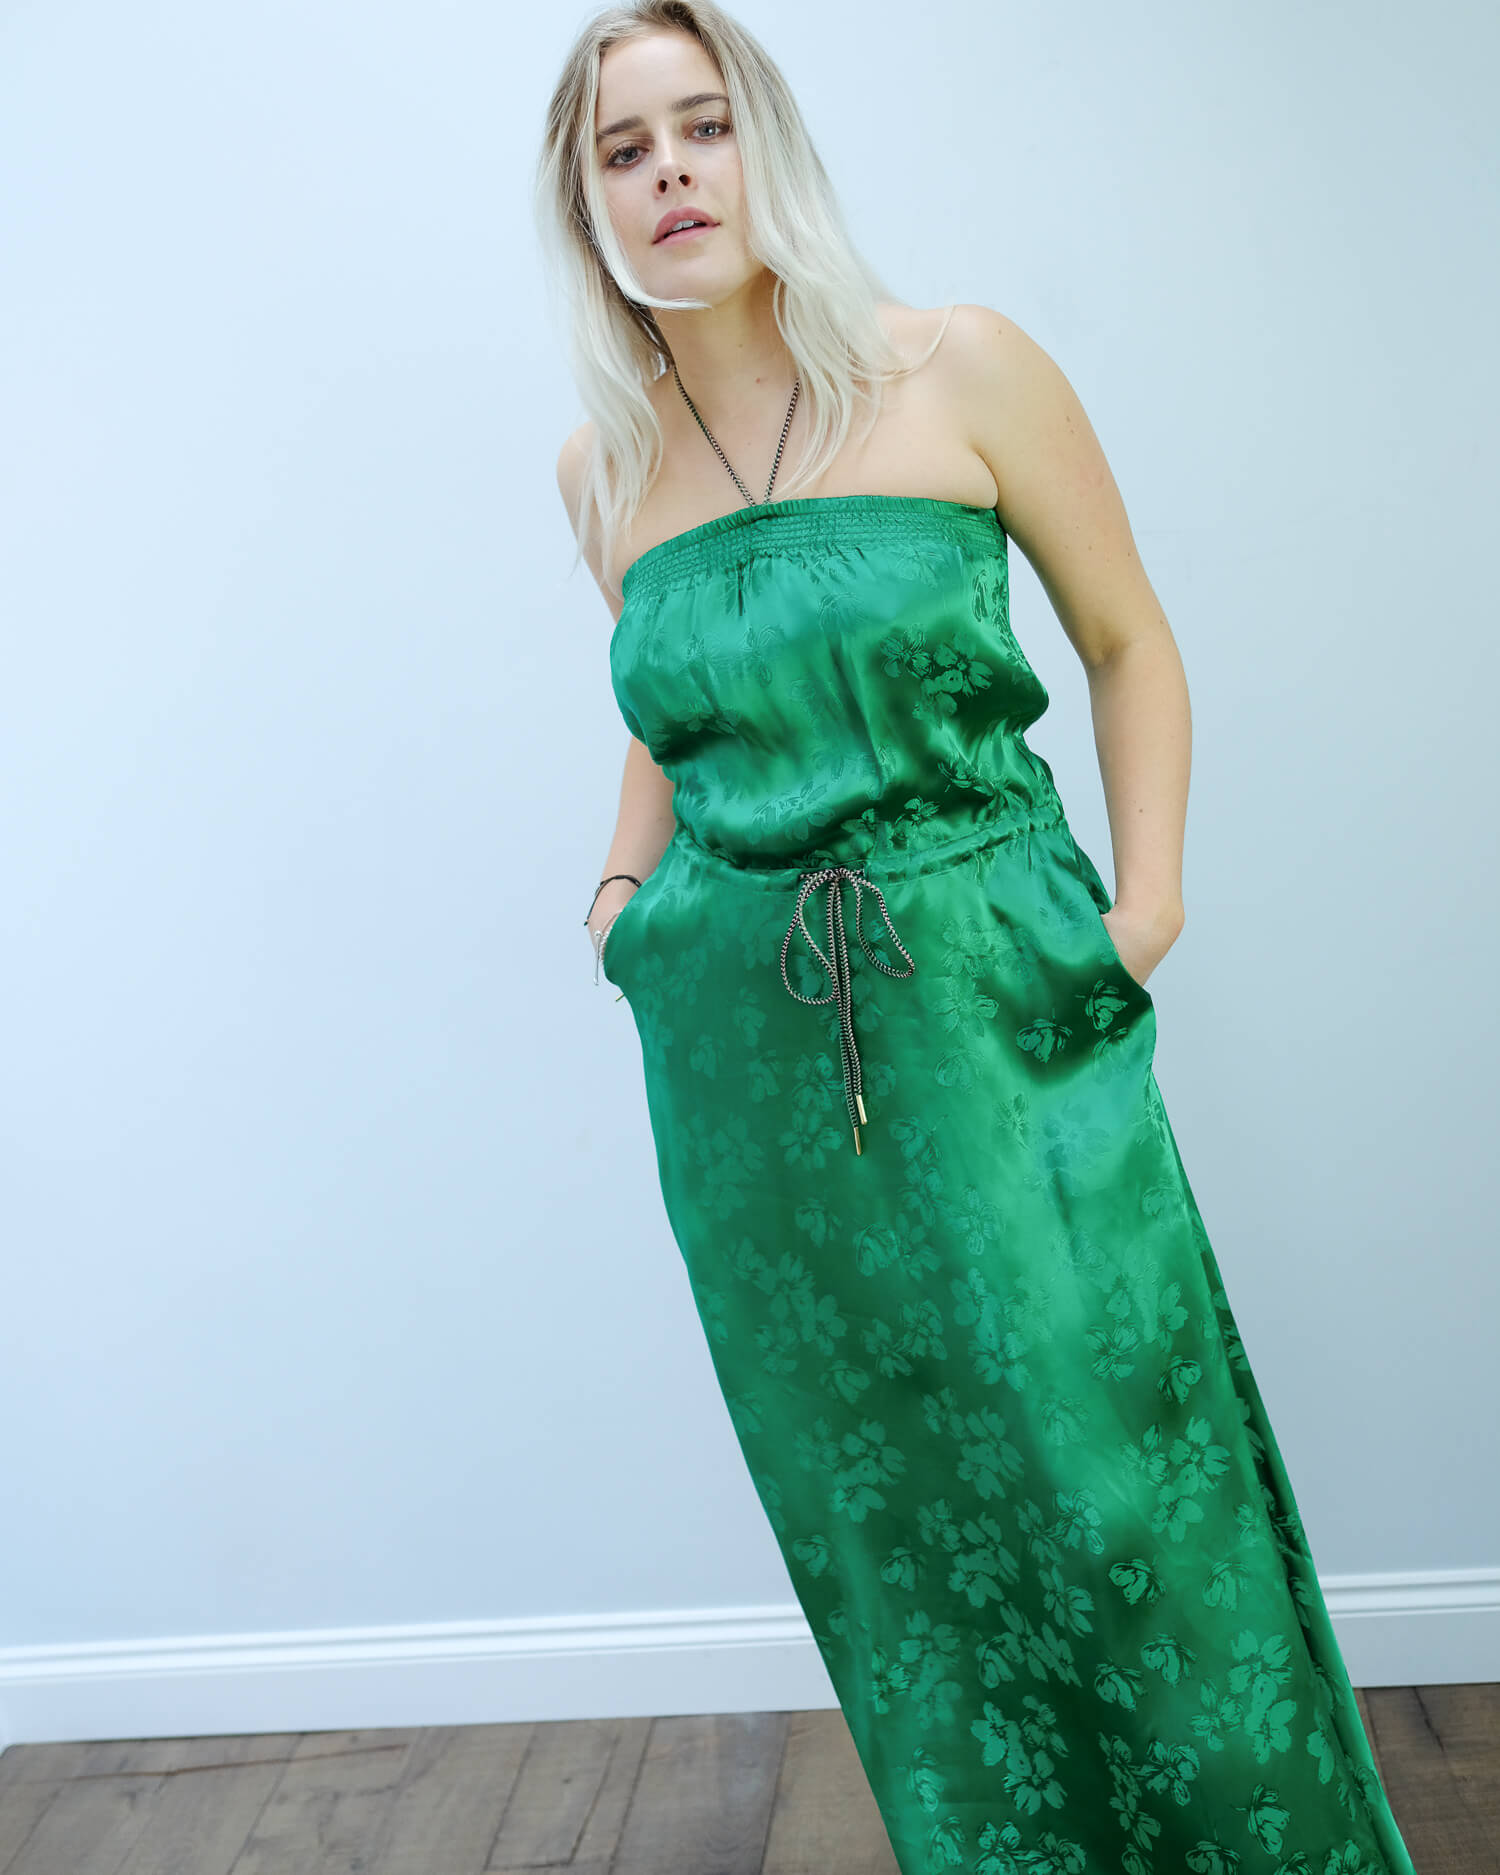 EA Vather strapless dress in green